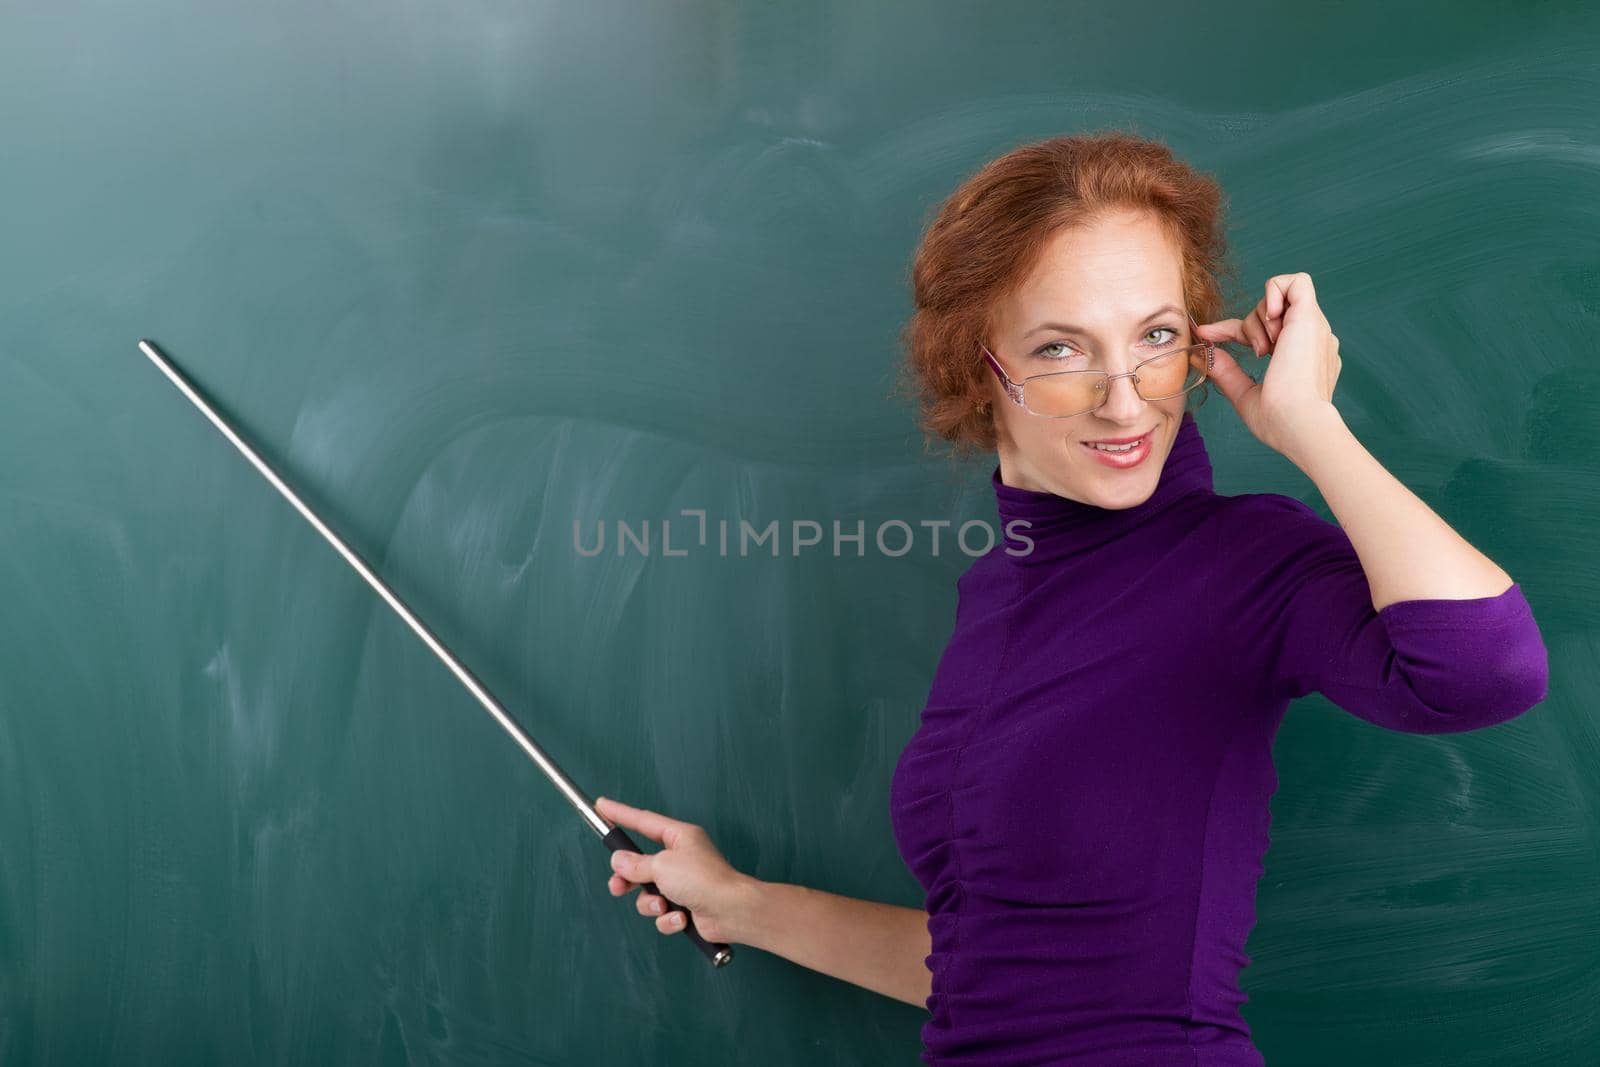 Teacher standing at blackboard with pointer. Portrait of smiling young woman looking over glasses. Teacher posing at green chalkboard and pointing at it